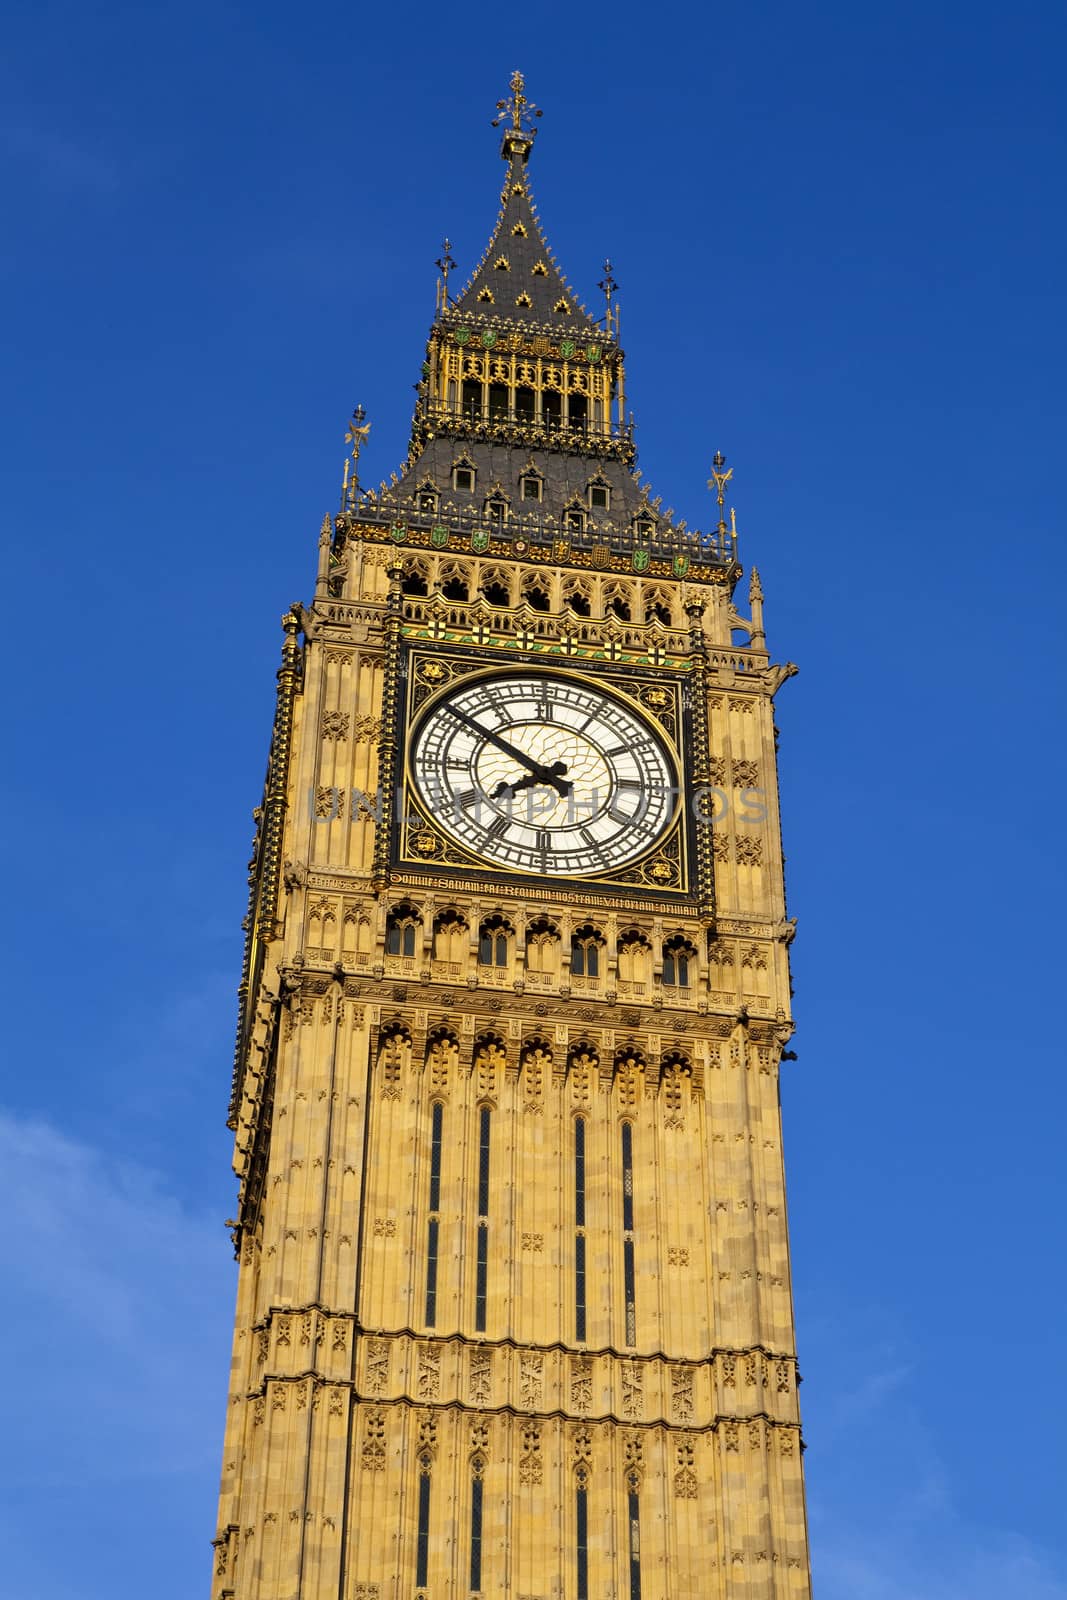 Looking up at the impressive Big Ben in London.